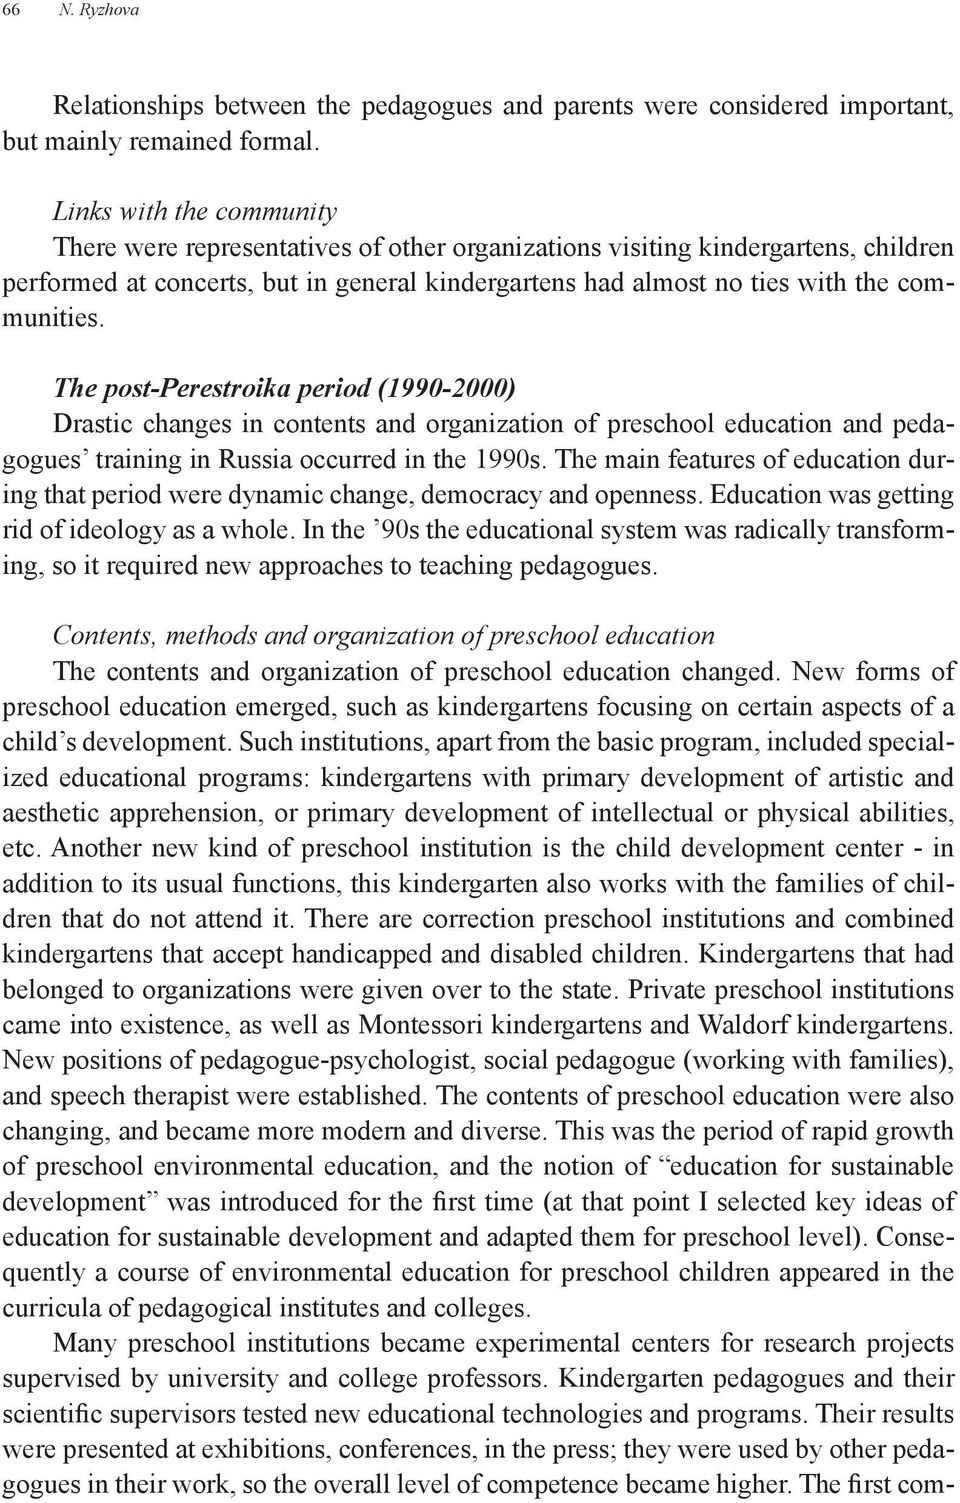 The post-perestroika period (1990-2000) Drastic changes in contents and organization of preschool education and pedagogues training in Russia occurred in the 1990s.